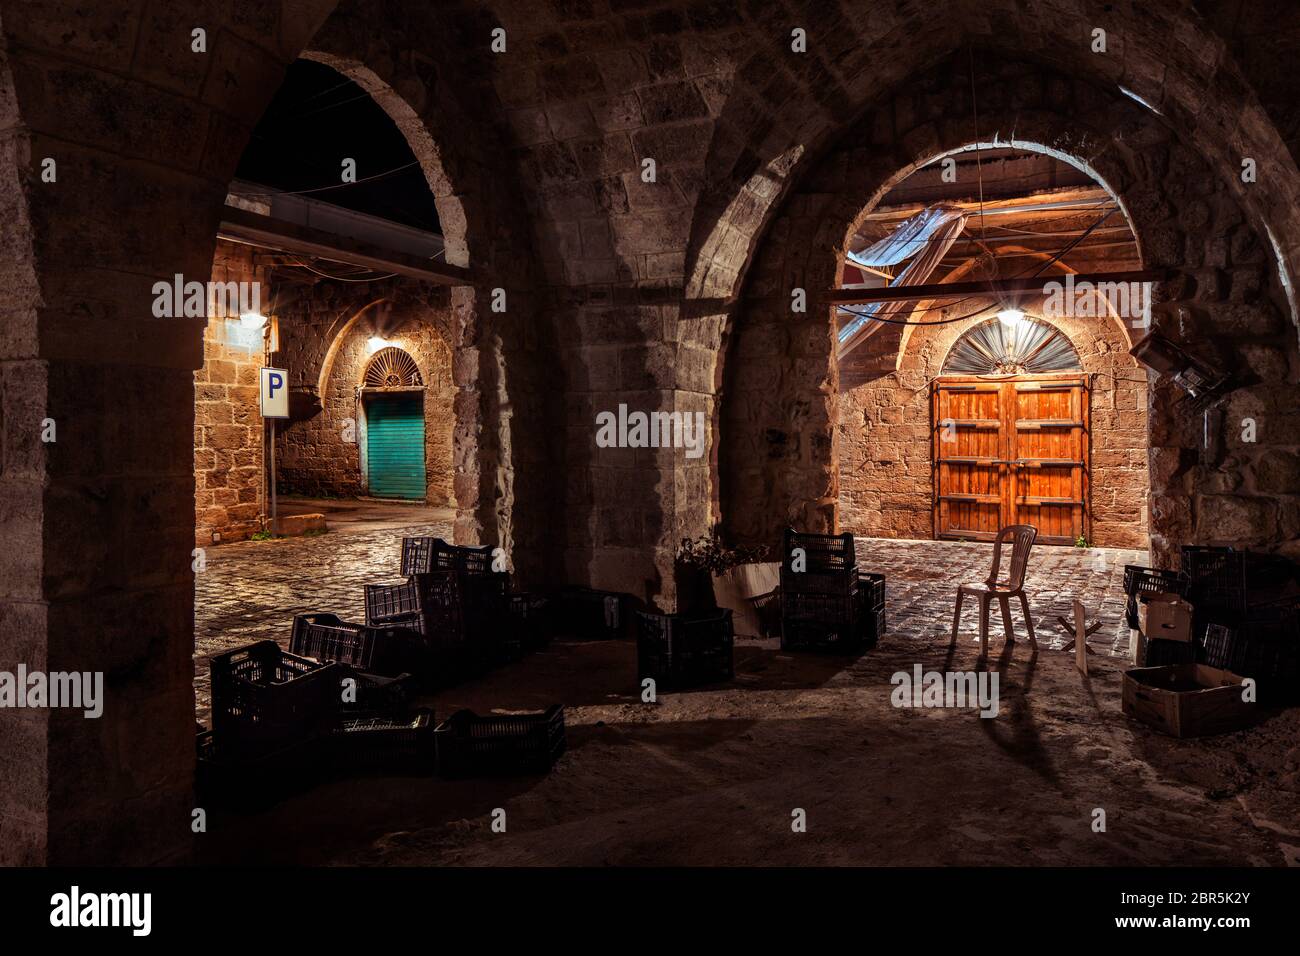 Beautiful old arabic style souk, vintage bazaar at night, no people, traditional ancient Arabic architecture, retail store, tourists attraction, Leban Stock Photo